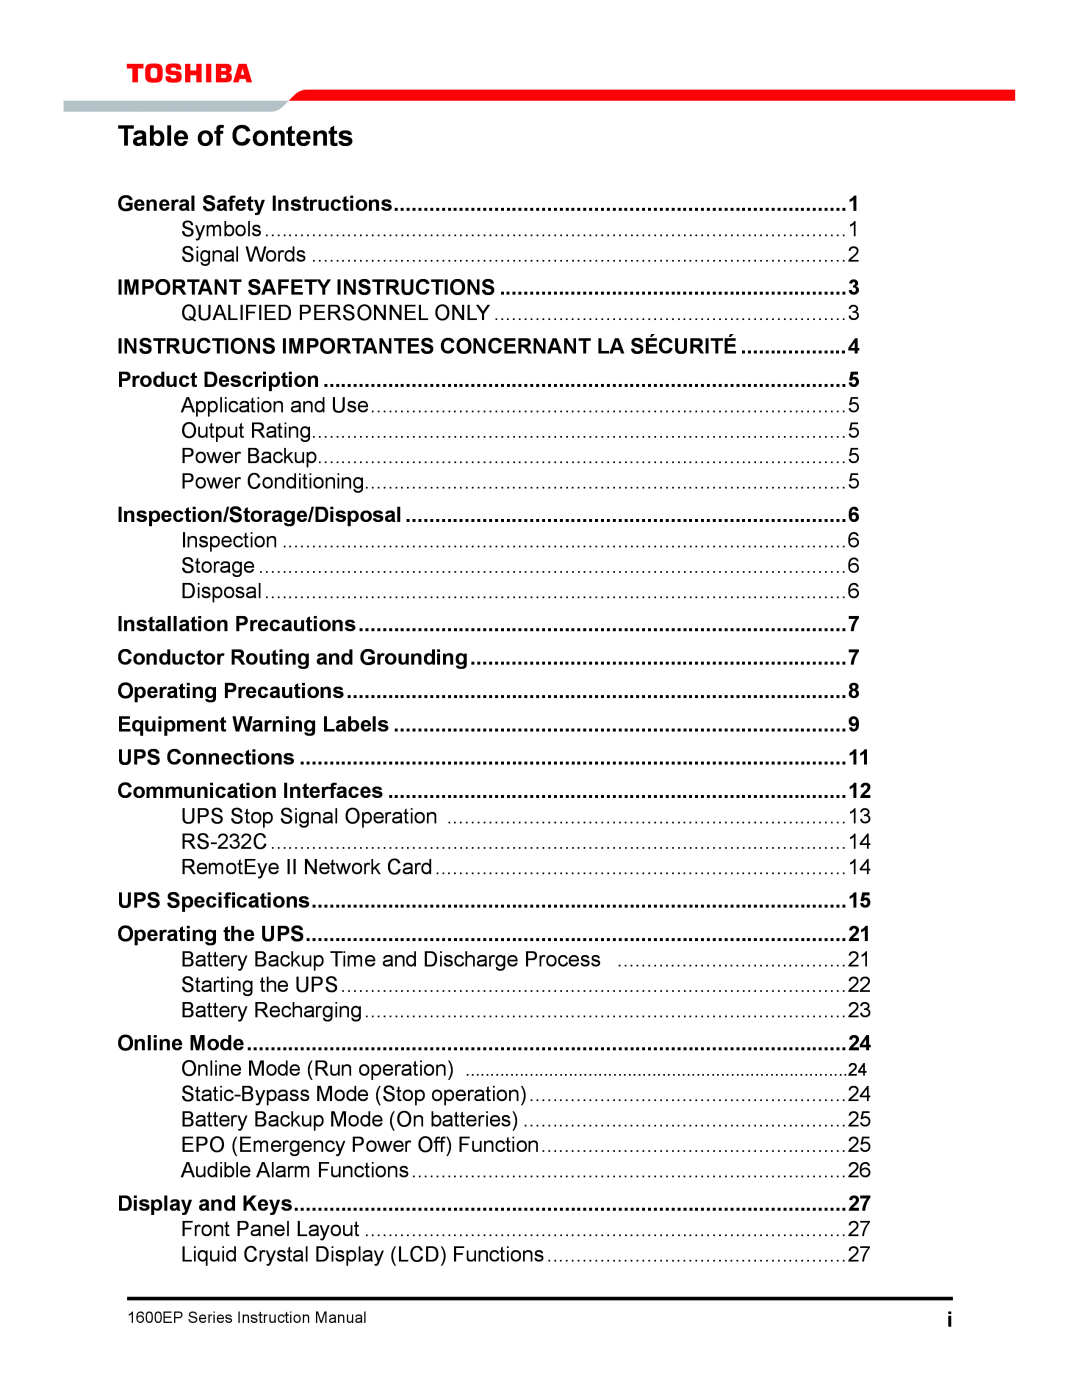 Toshiba 1600EP Series manual Table of Contents 